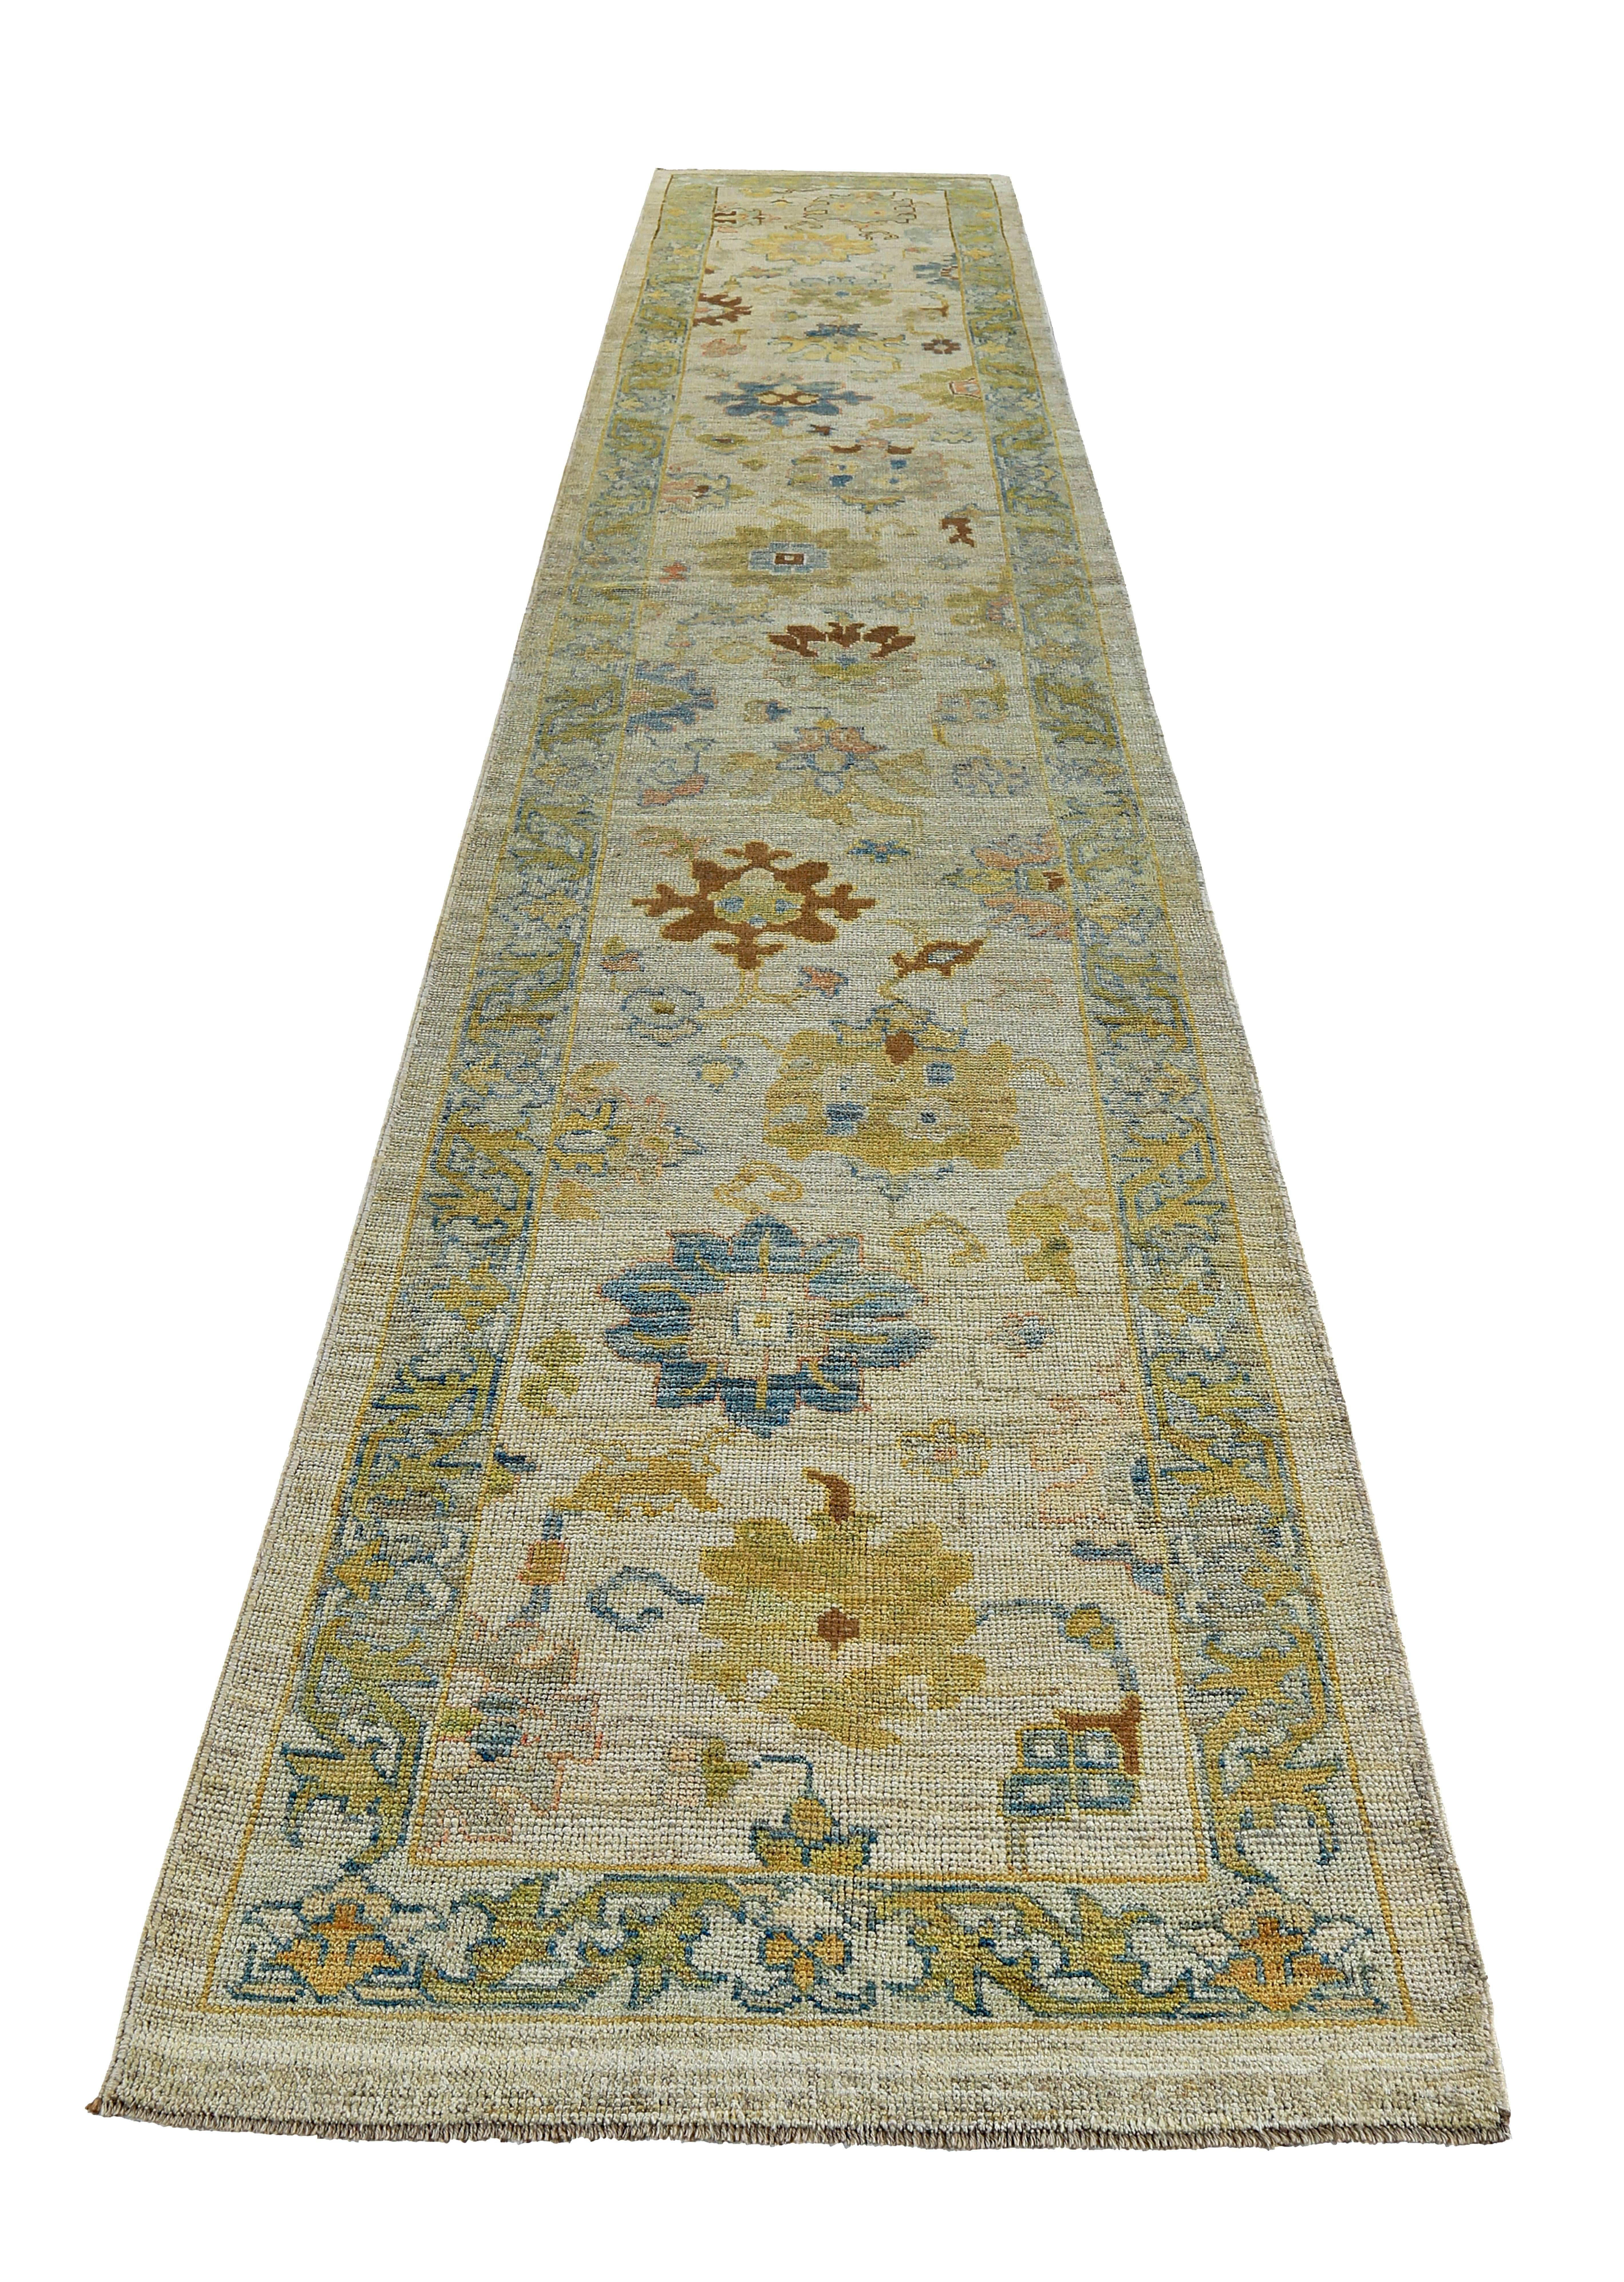 Turkish runner rug made of handwoven sheep’s wool of the finest quality. It’s colored with organic vegetable dyes that are certified safe for humans and pets alike. It features gold and blue floral details on a lovely ivory field. Flower patterns